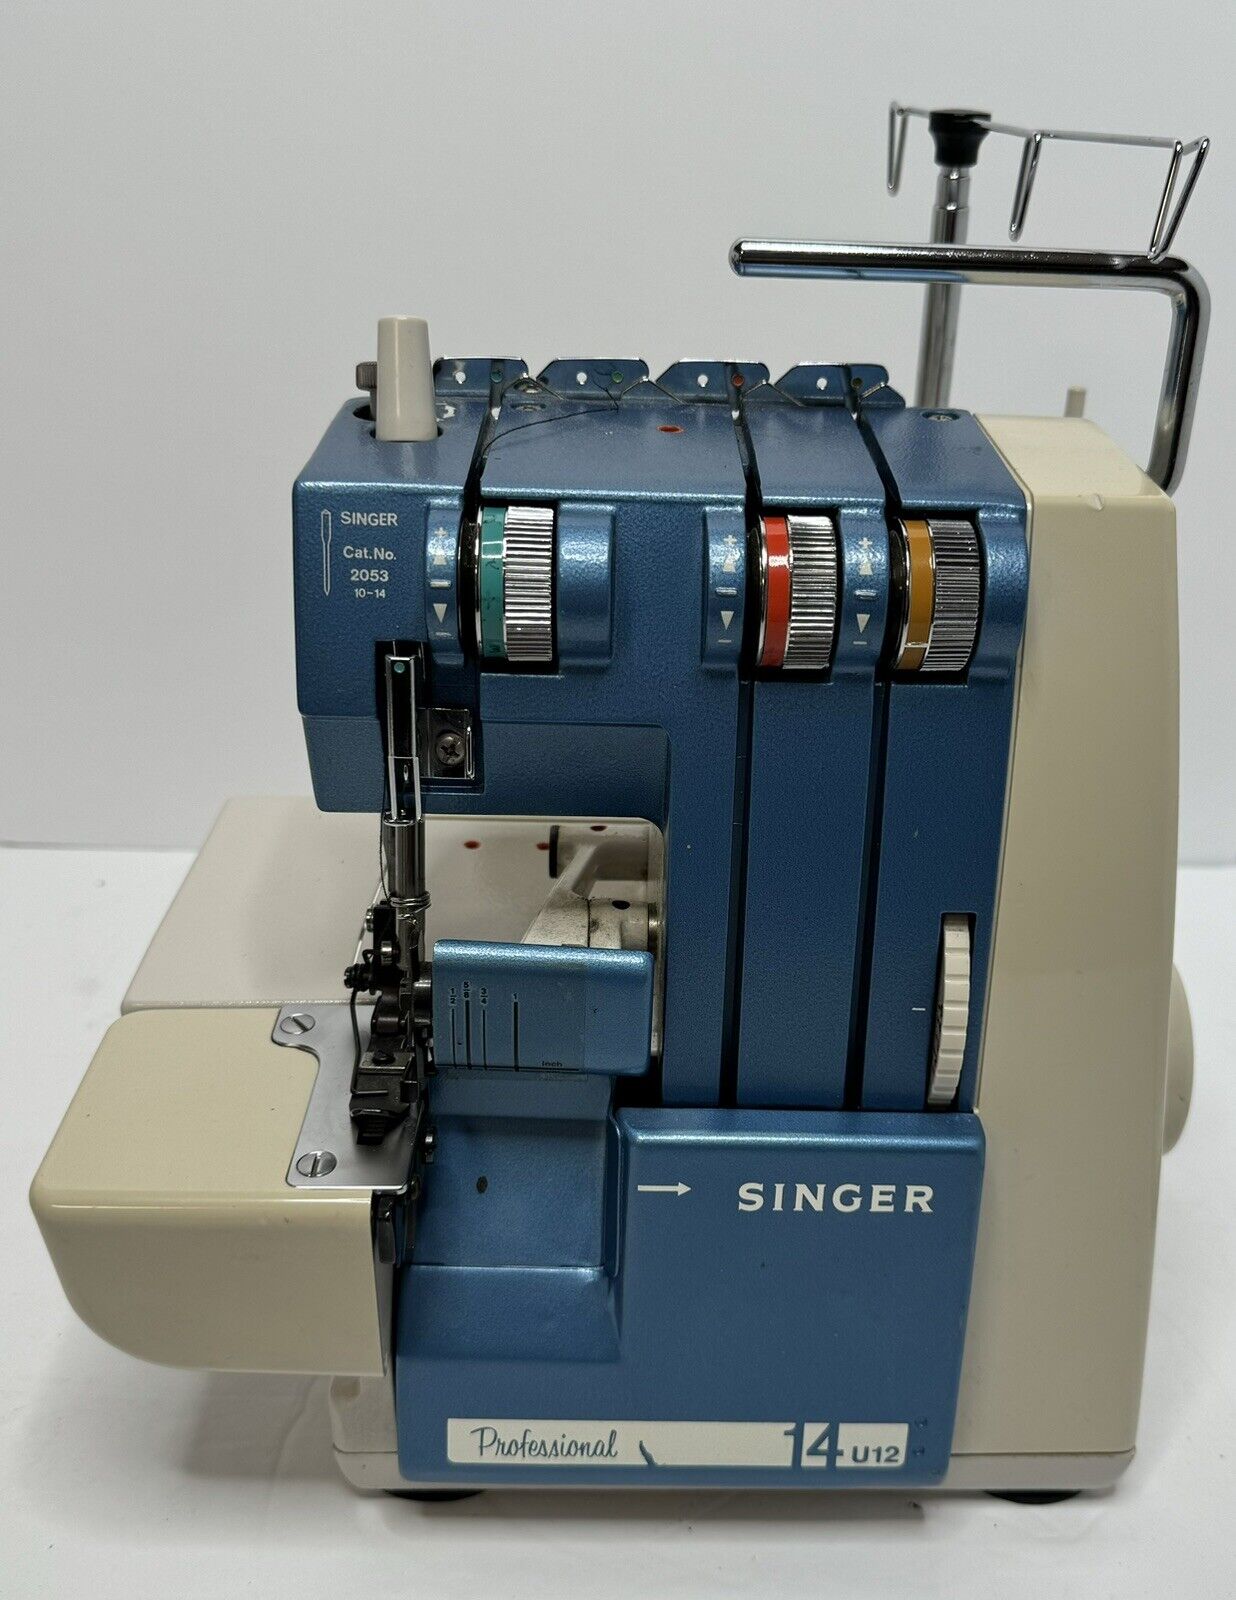 Singer Professional 14U12 No Cord No Pedal As Is